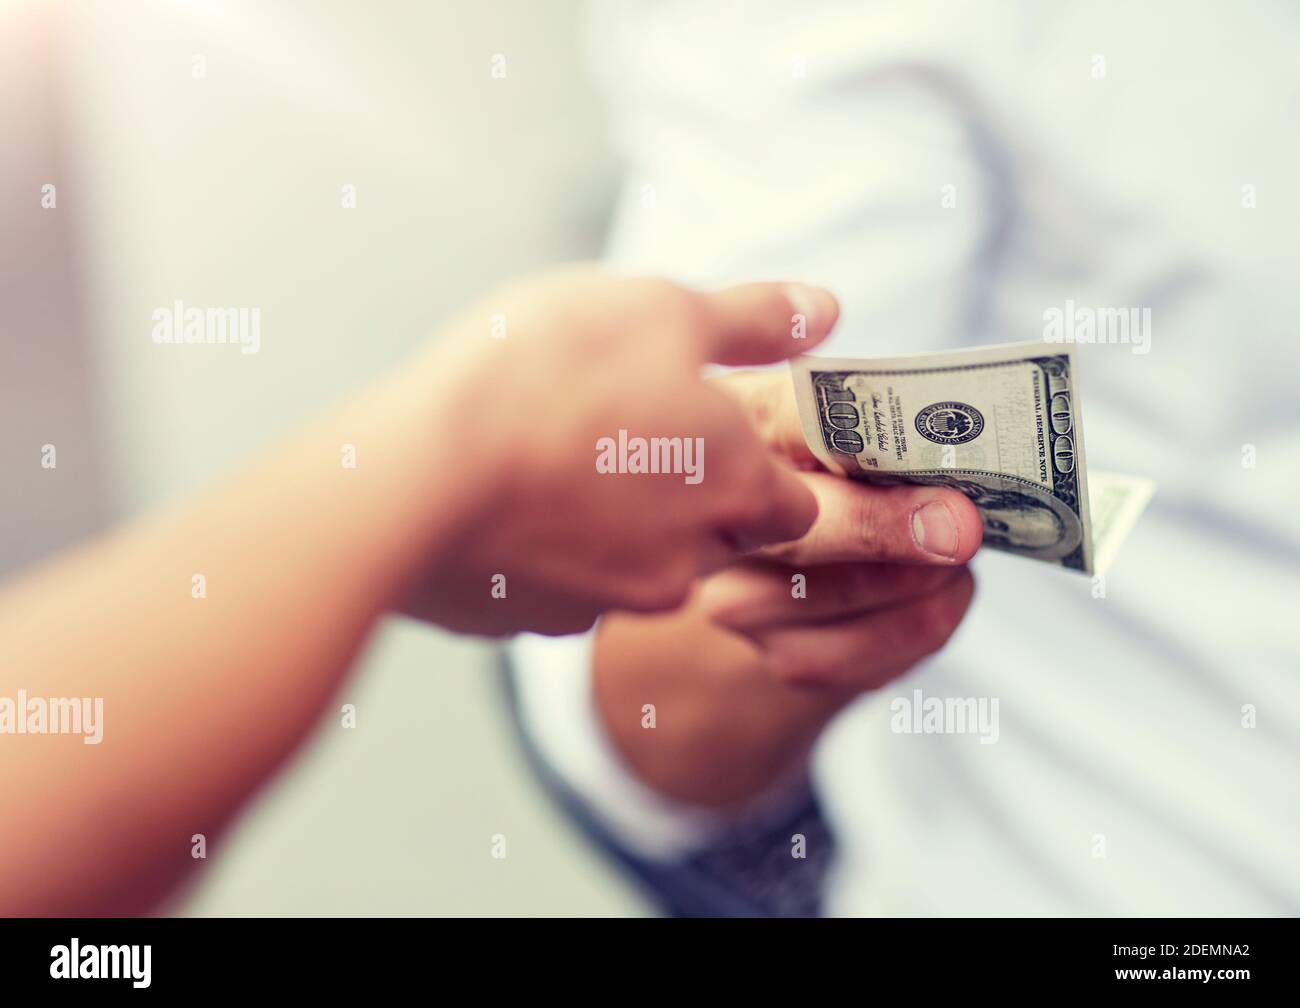 close up of hands giving and receiving dollar money Stock Photo